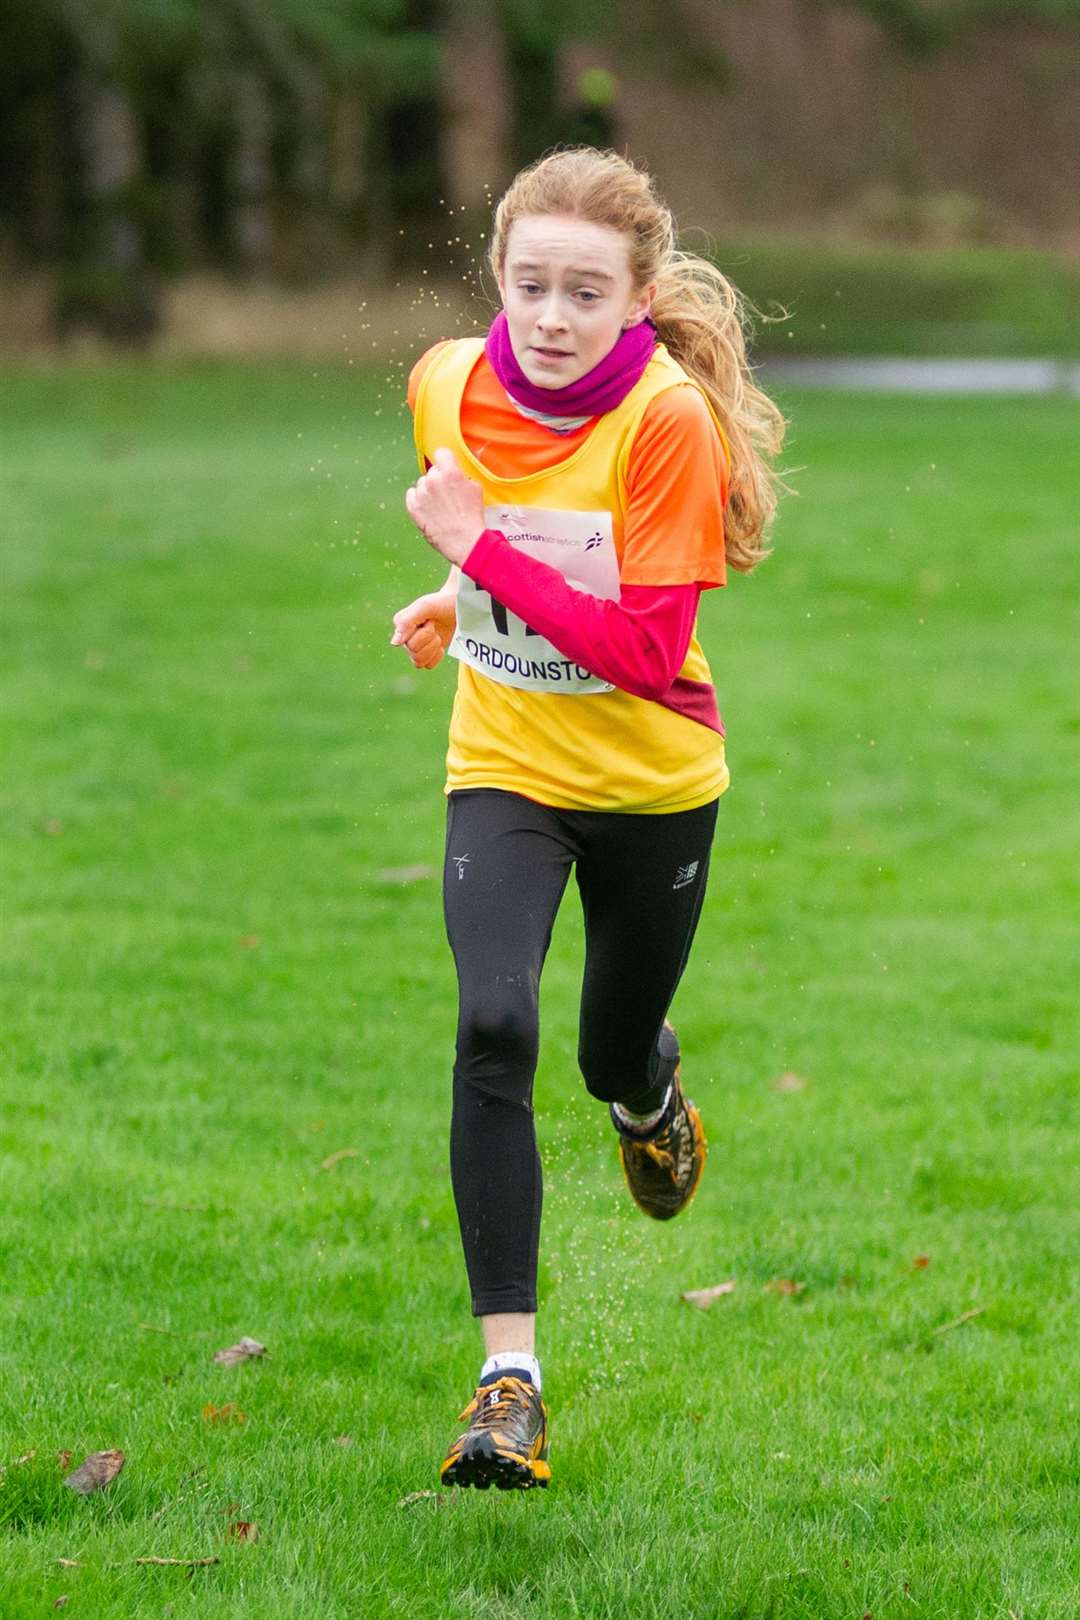 Inverness Harriers' Lois MacRae won the Under 13's Girls race with a time of 14:10. Picture: Daniel Forsyth